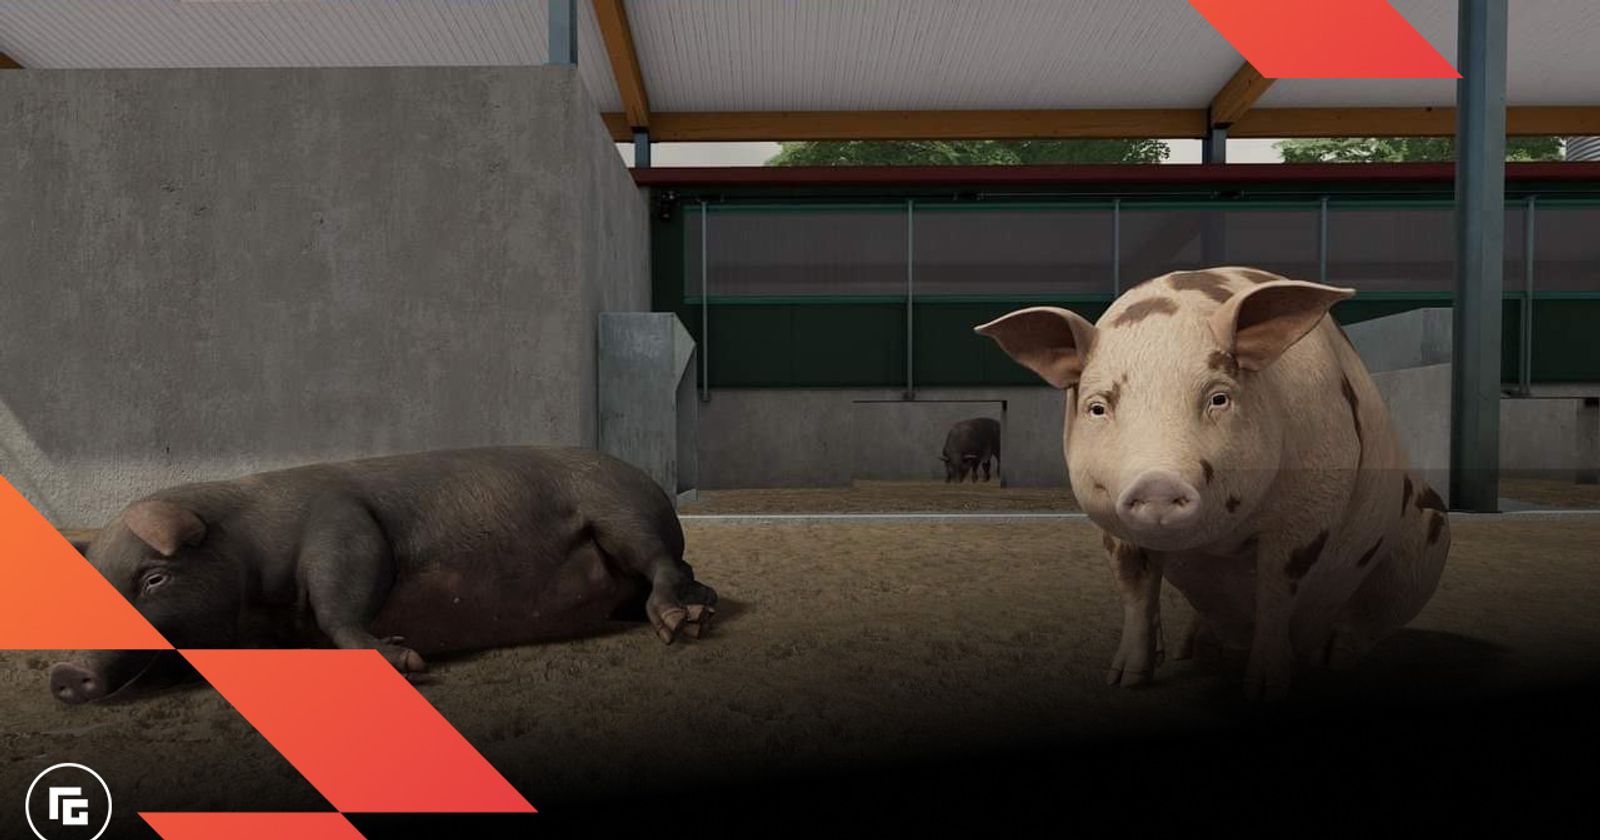 How To SEE When Your Pigs Are Ready For Sale!, Ranch Simulator